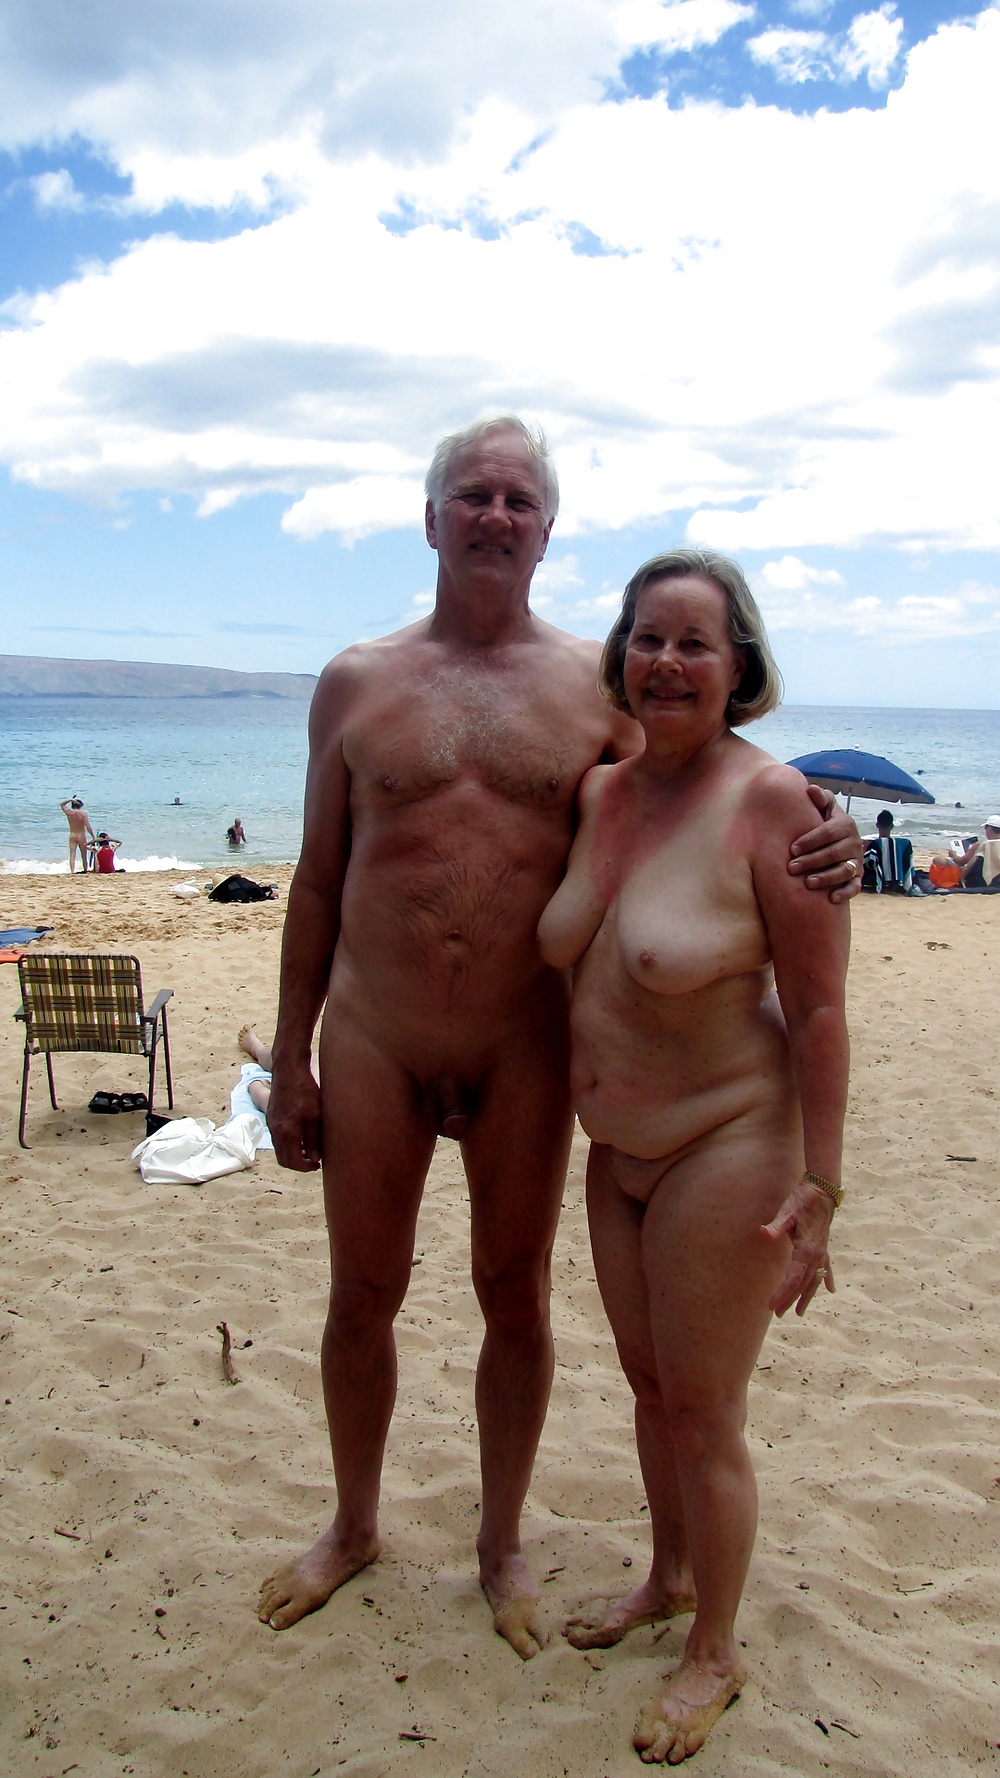 Mature couples porn gallery